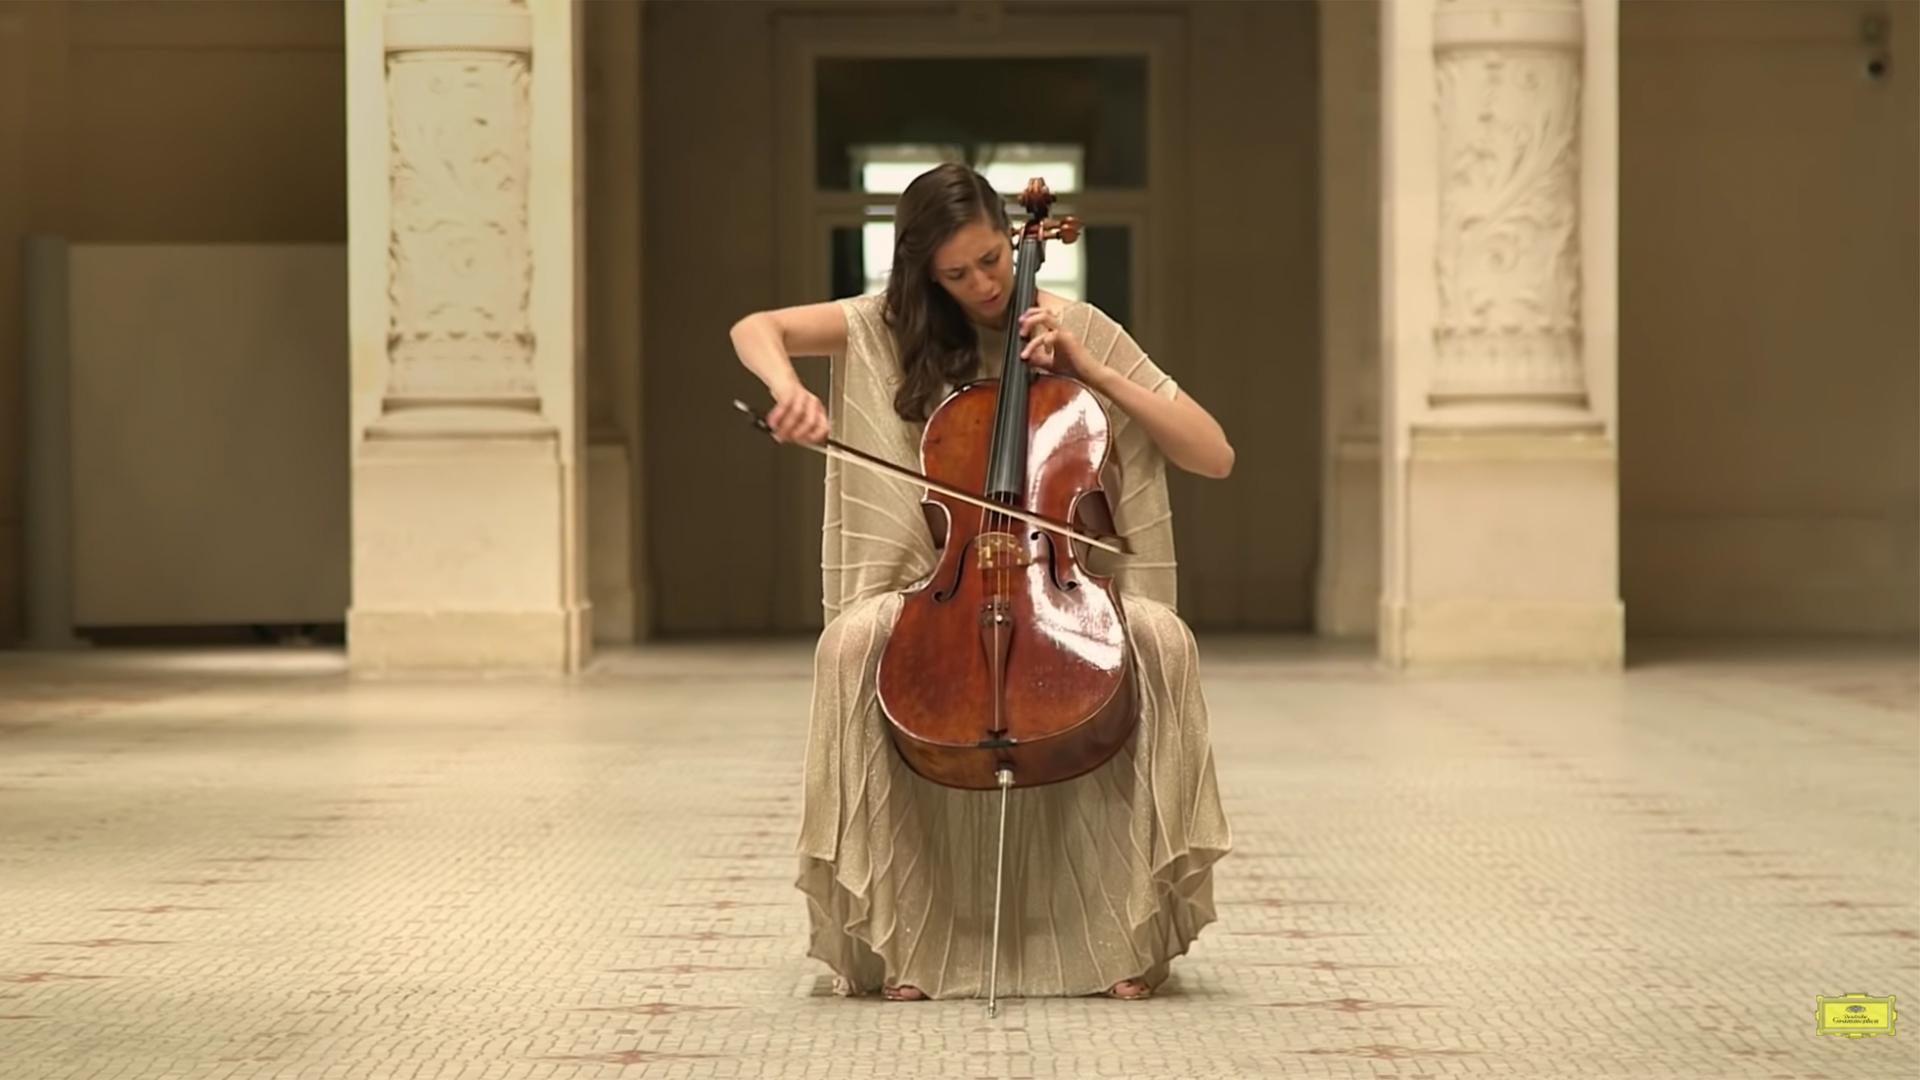 A woman playin cello appears in an empty museum hall.